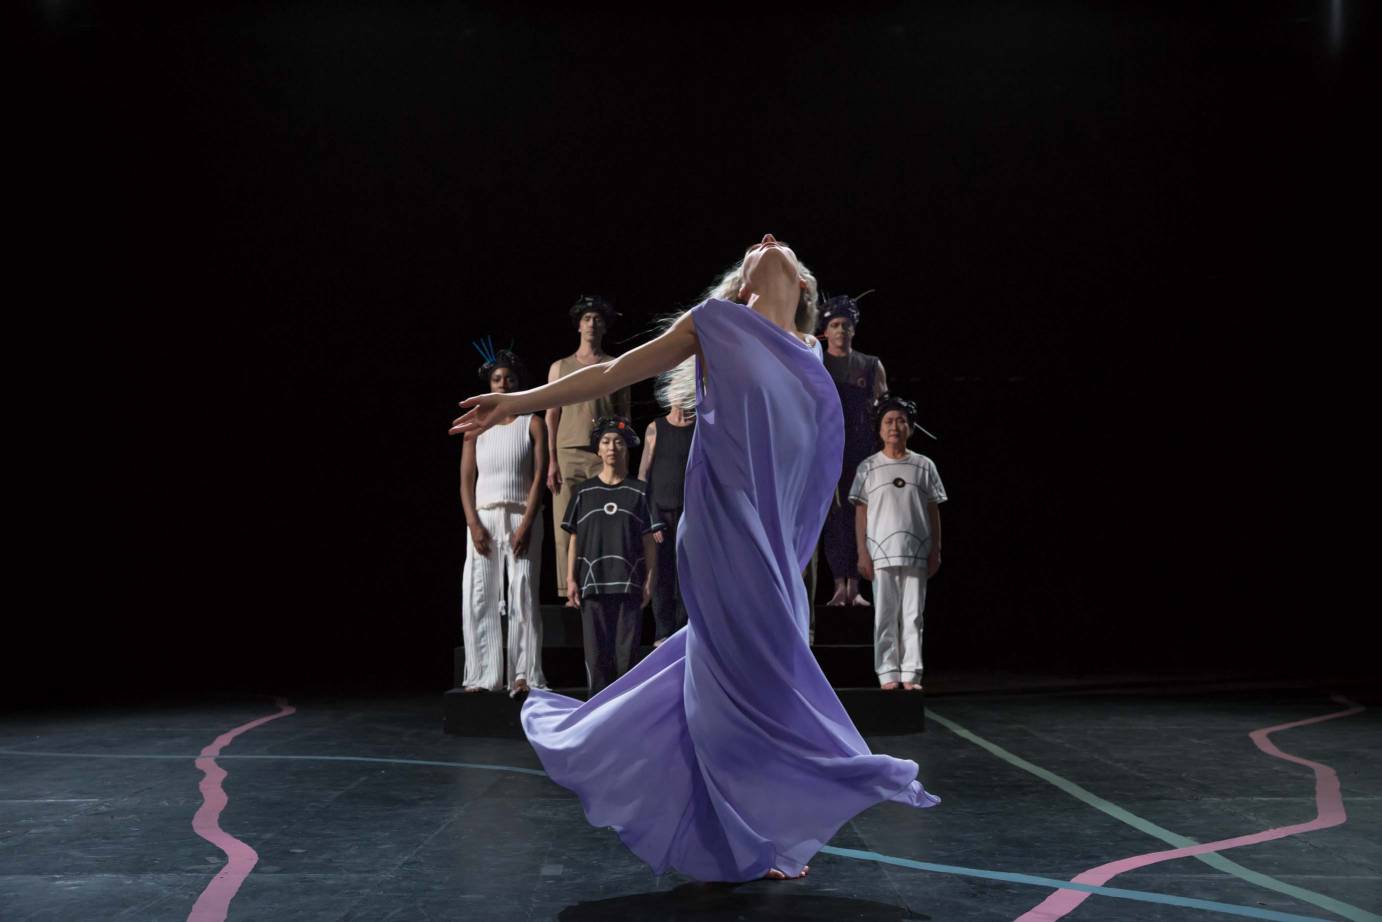 A female dancer clad in a purple dress sashays before a crowd of other dancers who stand watching her.